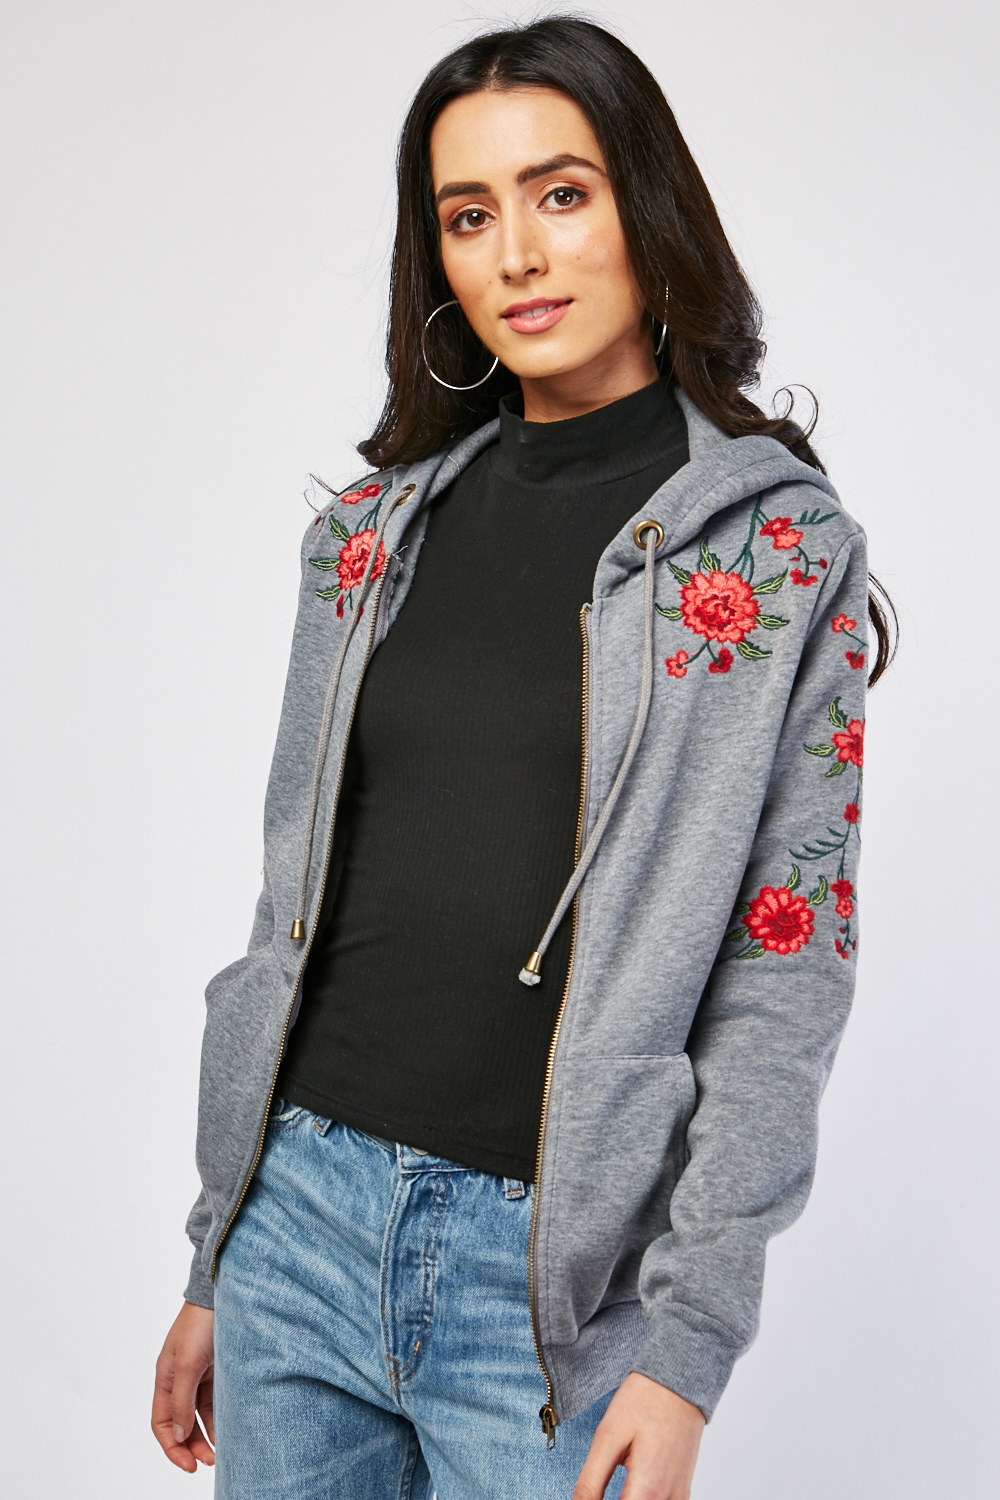 Embroidered Rose Hooded Jacket - Just $7